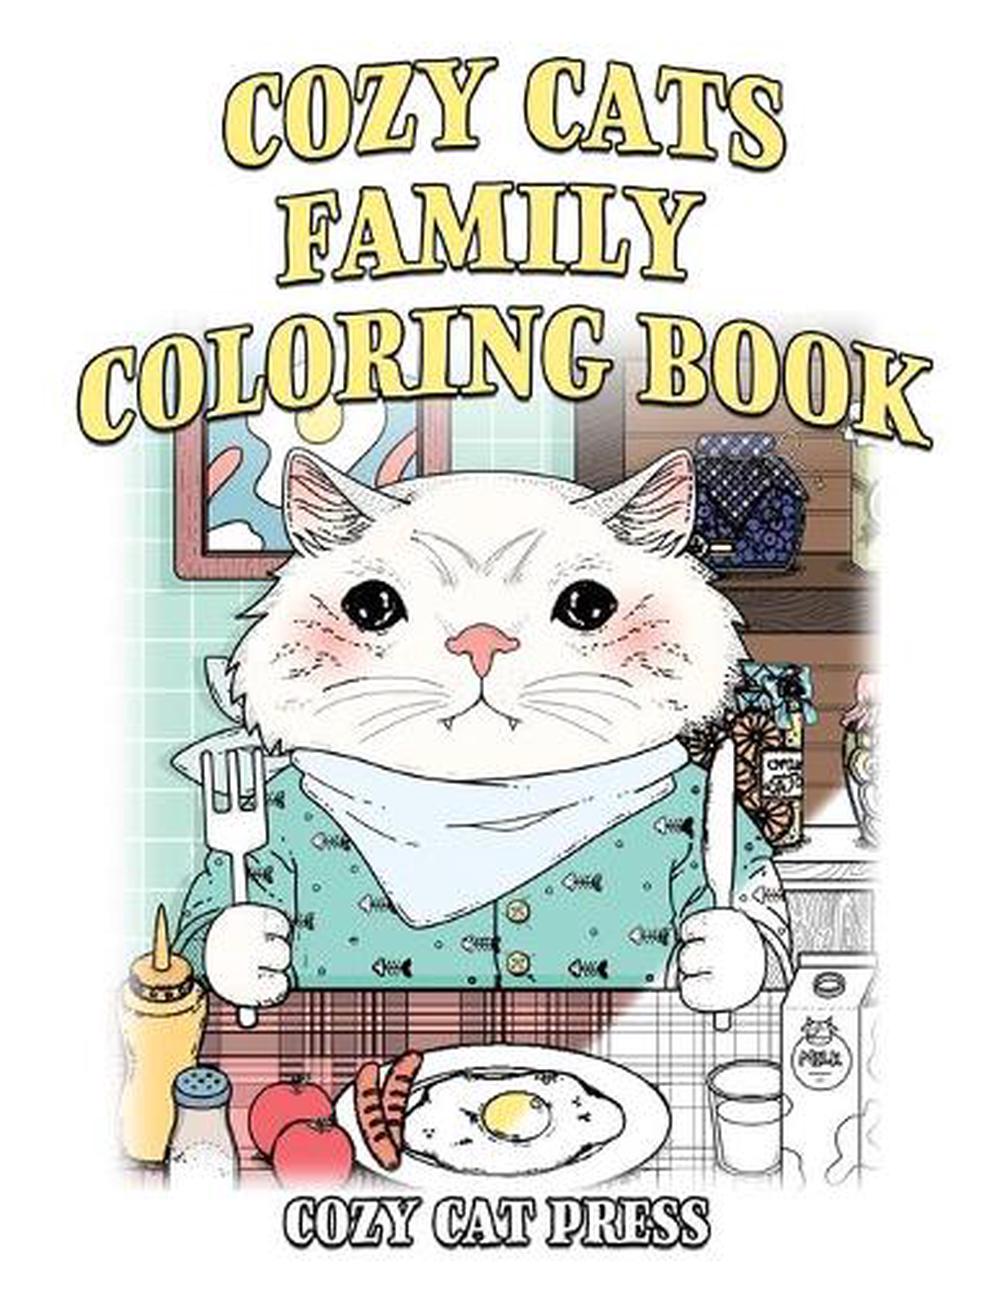  Cozy  Cats  Family Coloring Book  by Patricia Rockwell 